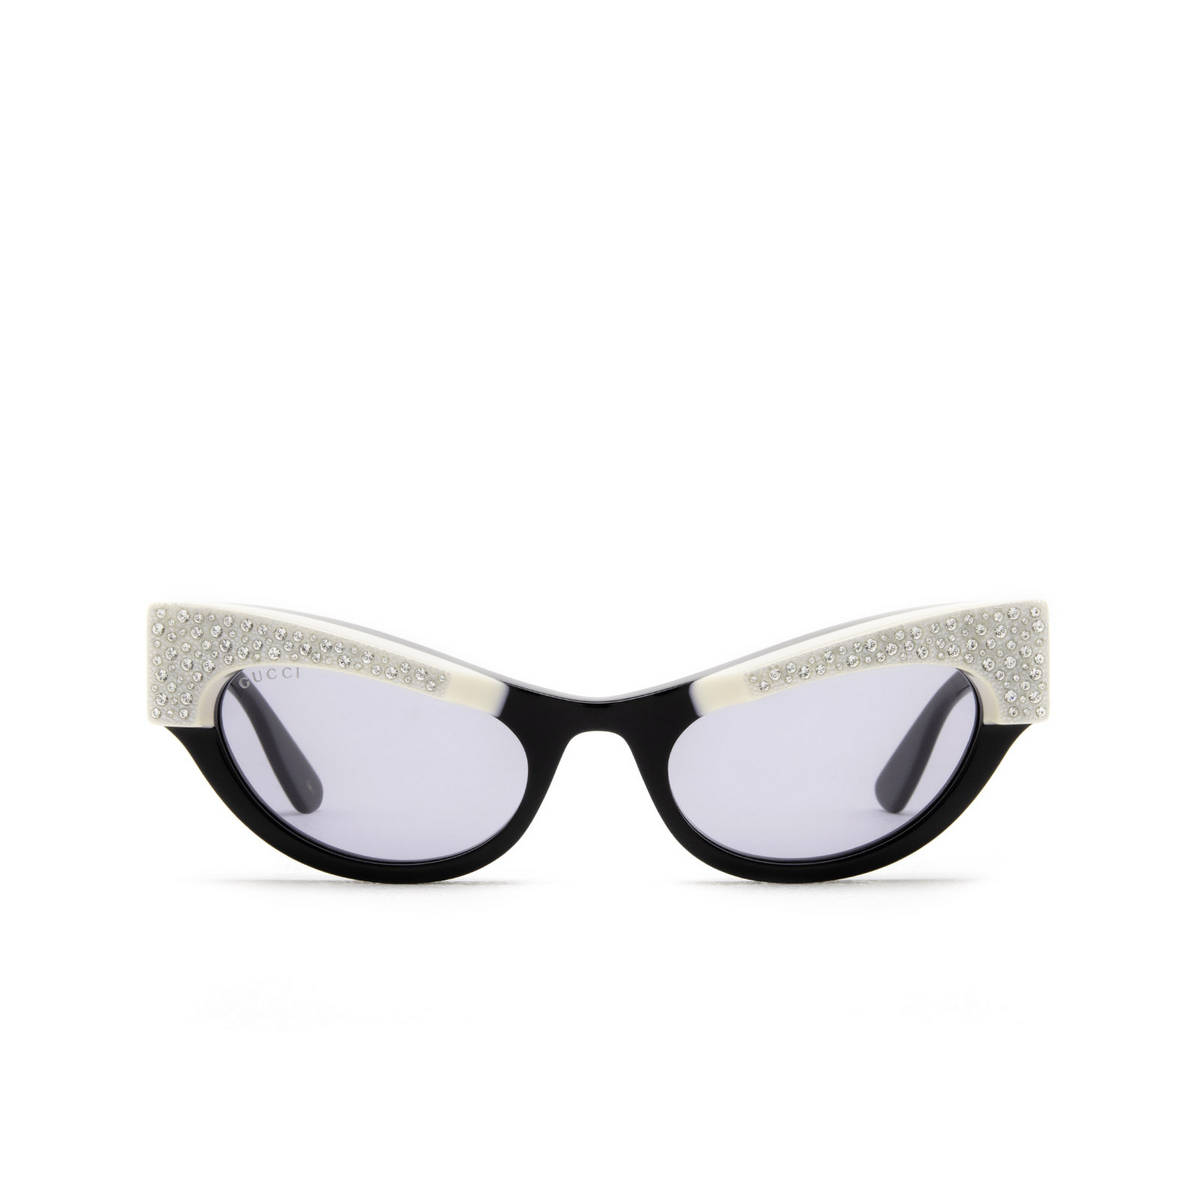 Gucci® Cat-eye Sunglasses: GG1167S color Black 001 - front view.